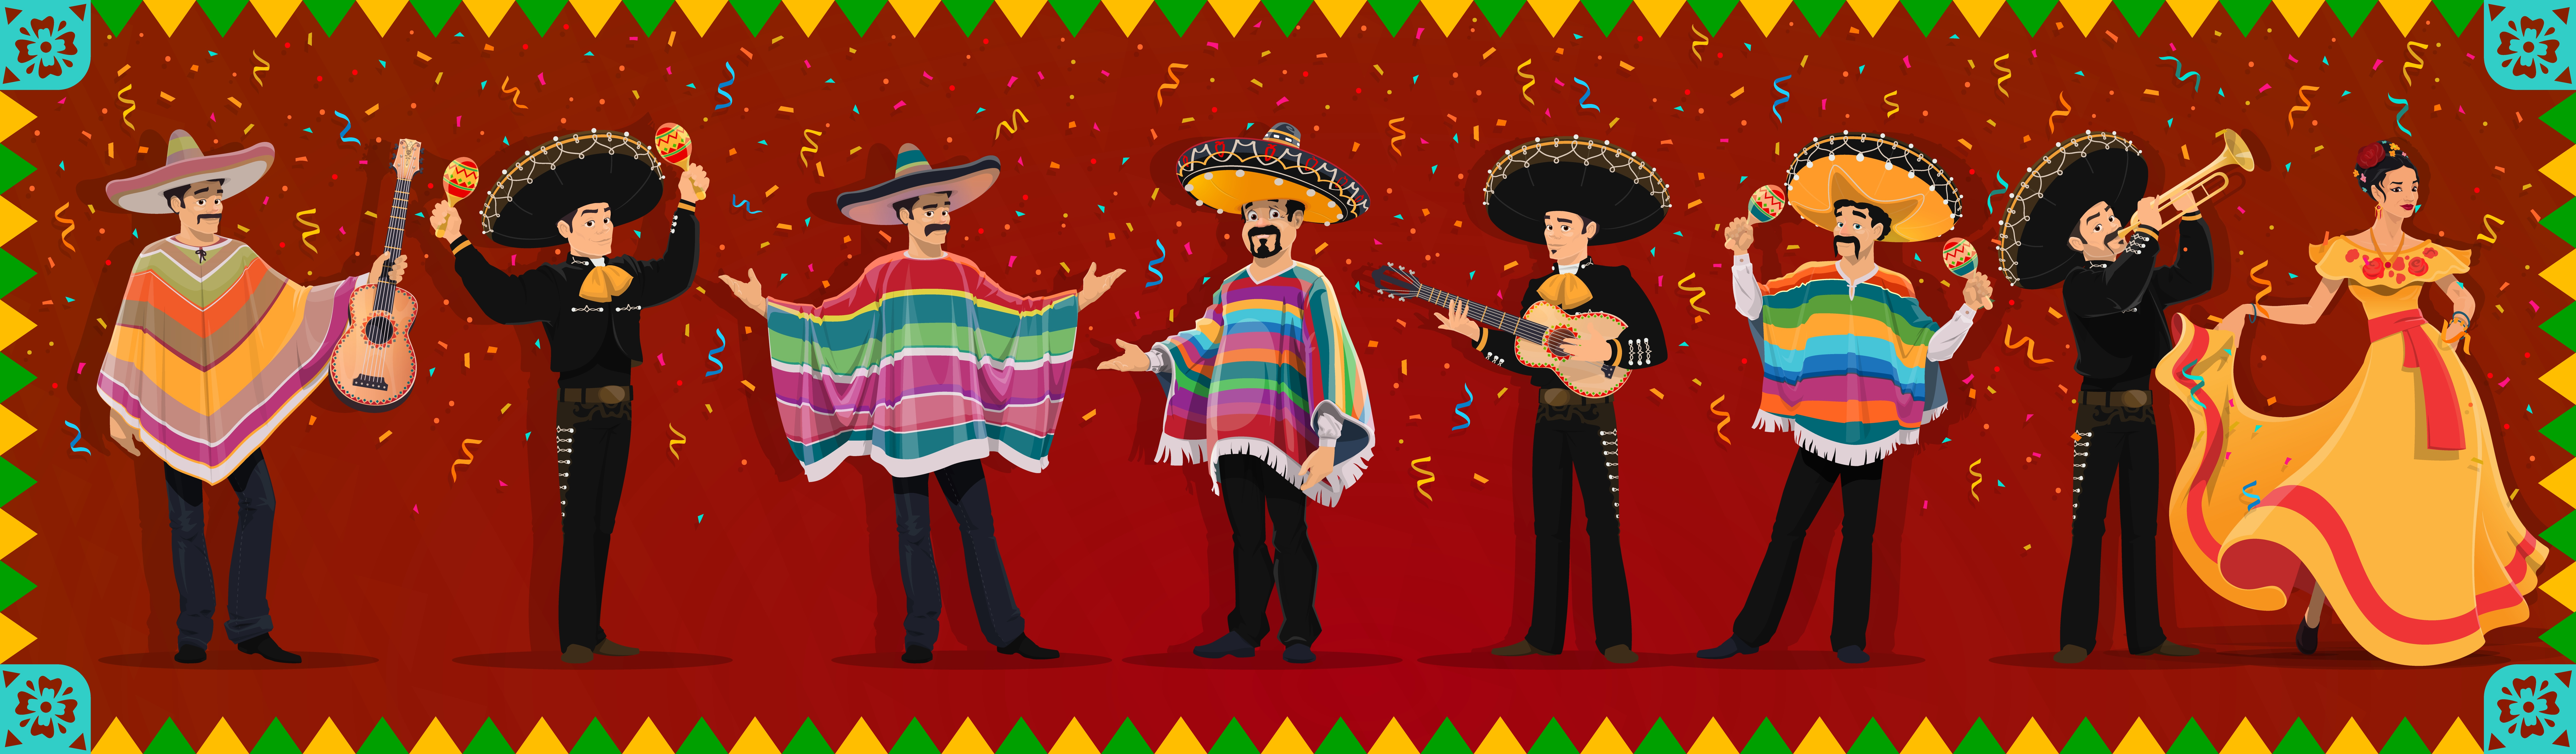 Cartoon Mexican characters on holiday carnival